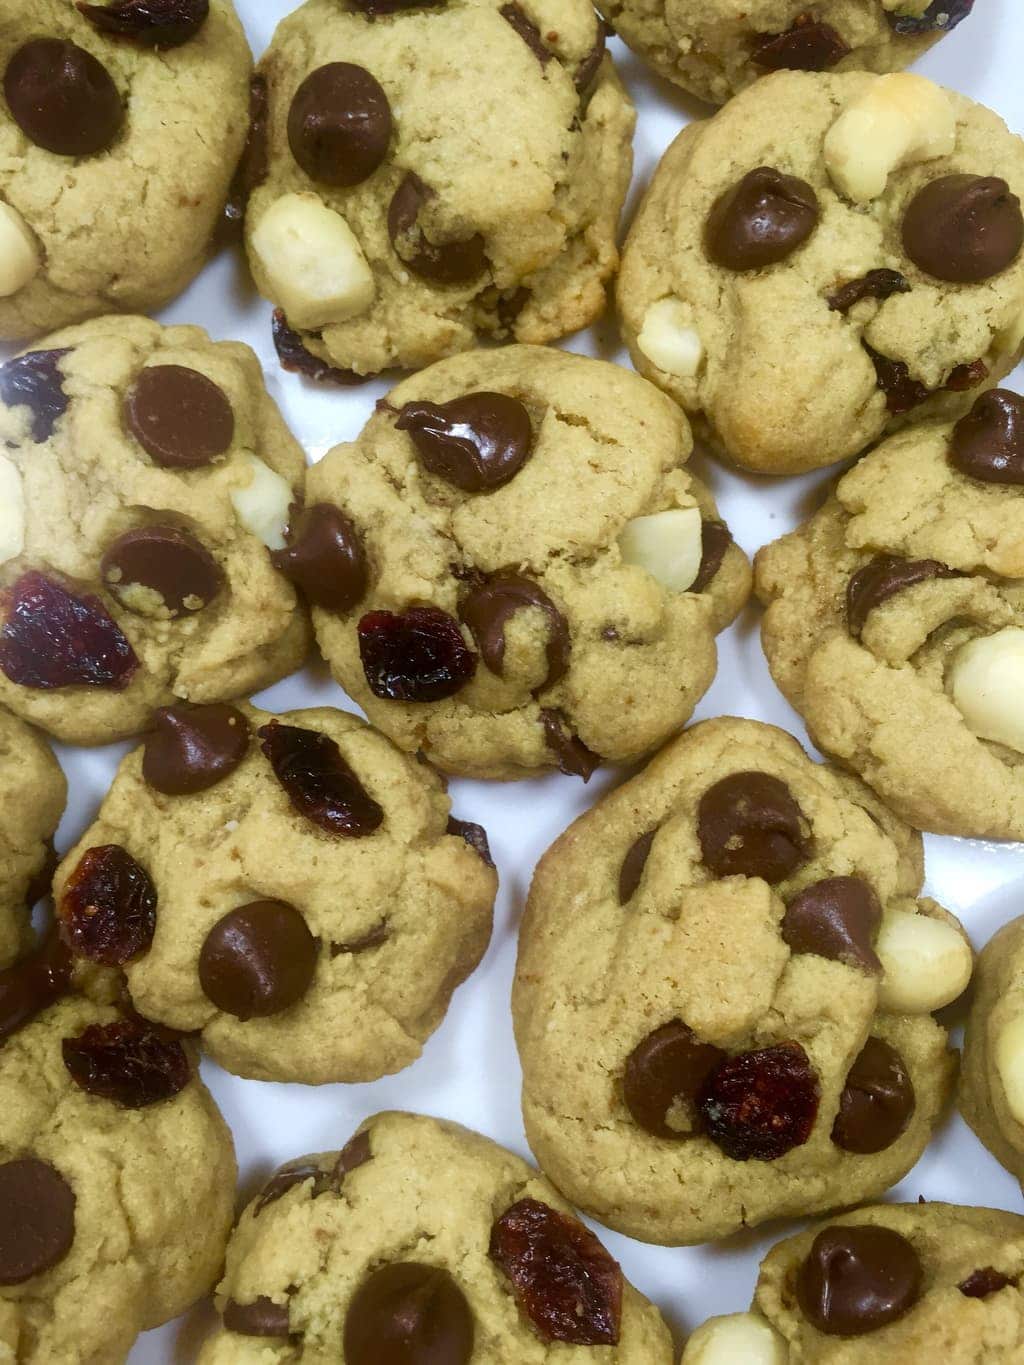 Chocolate Chip Macadamia Cookies with Cranberries